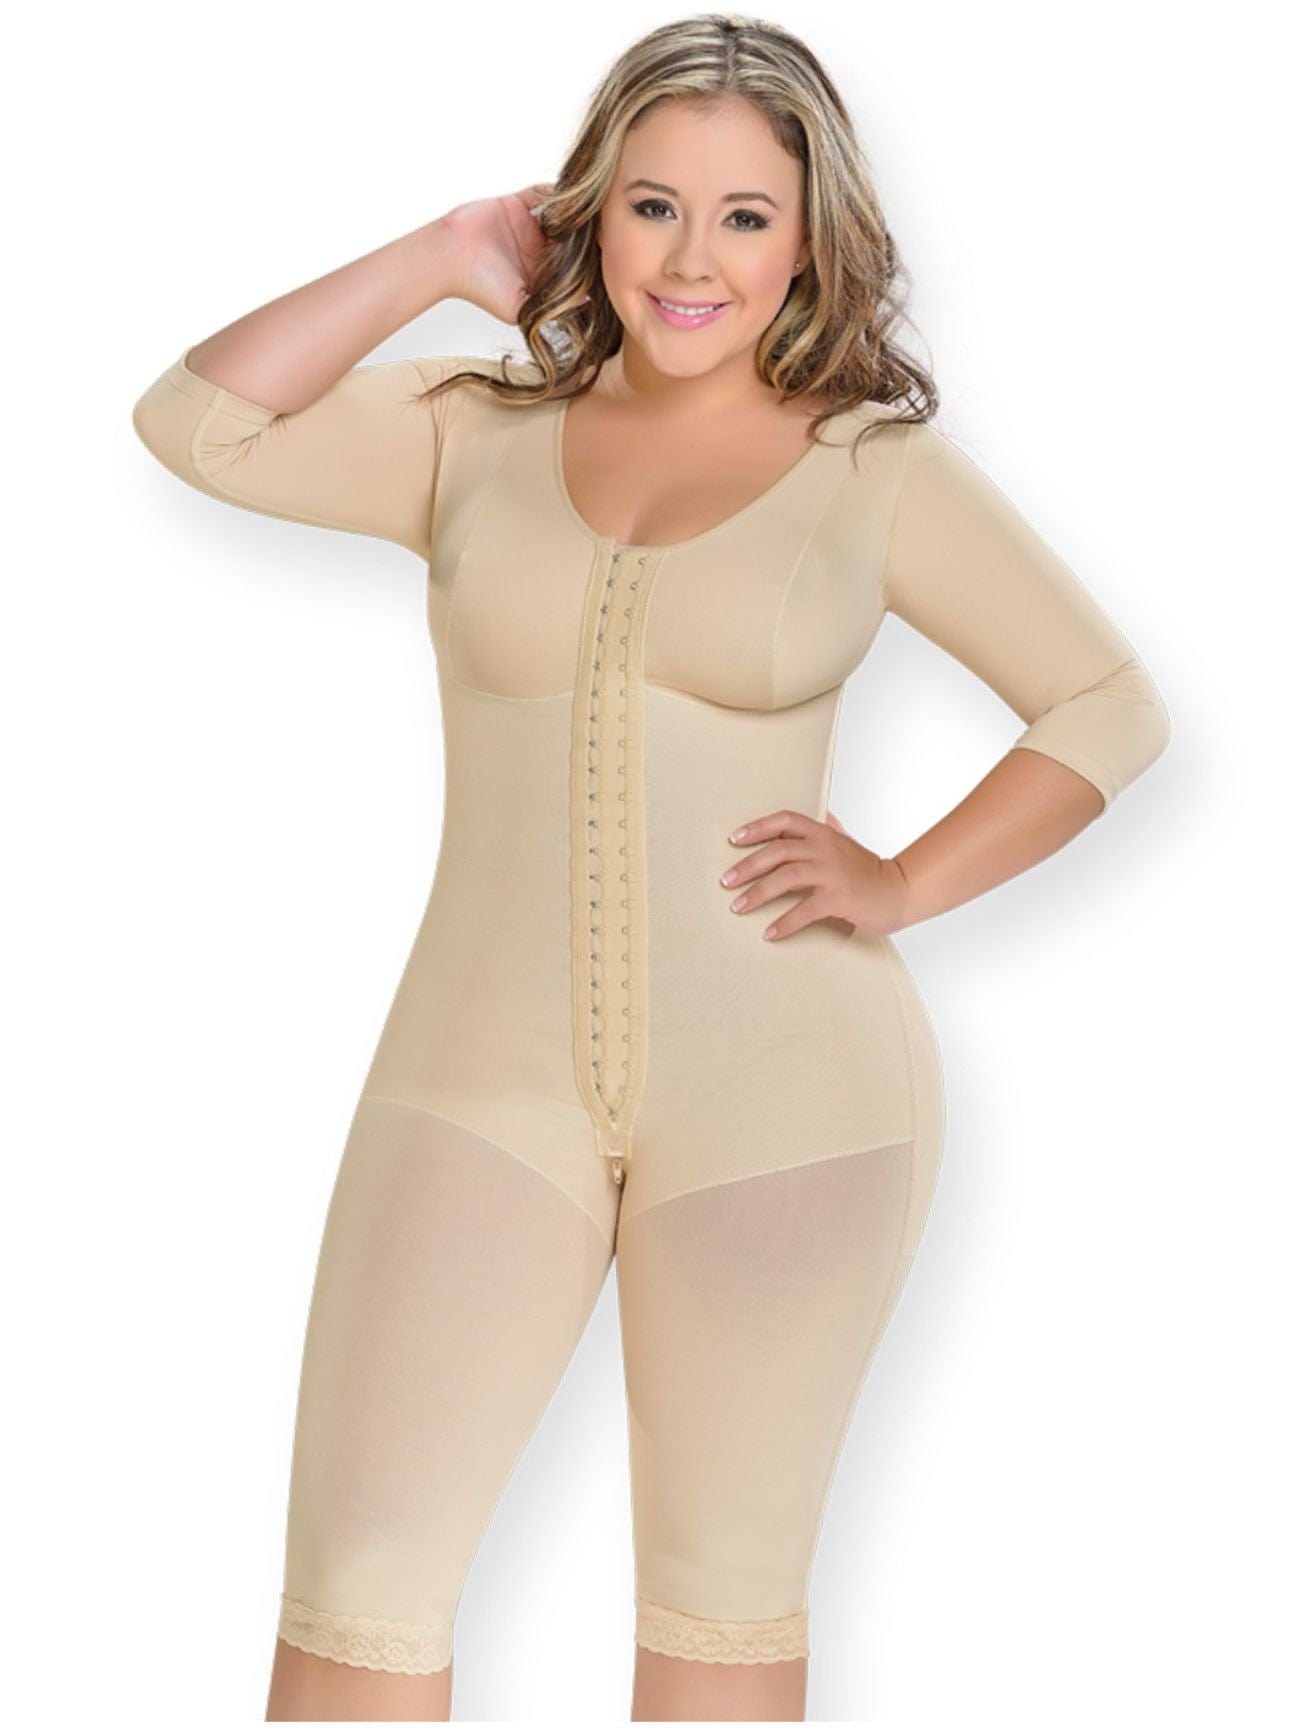 Fajas MyD 0161 Full Body Shaper to the knee with sleeves